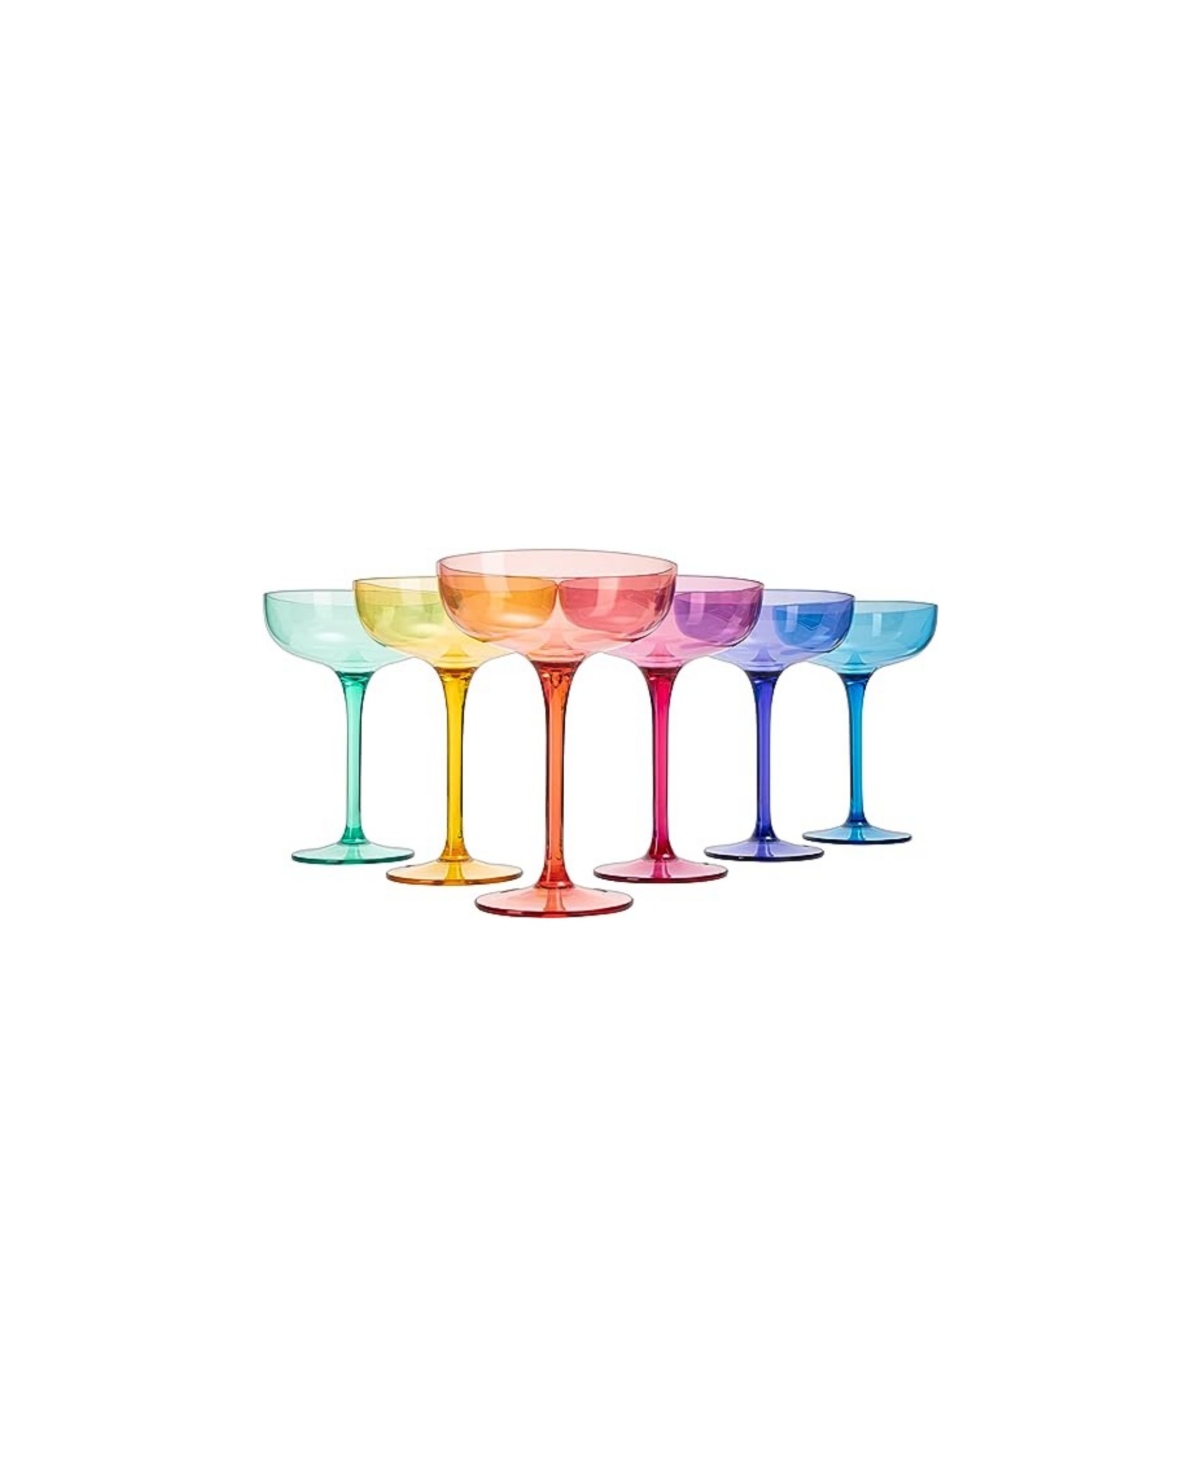 The Wine Savant Glass European Style Martini Crystal Acrylic Glasses, Set Of 6 In Multicolor